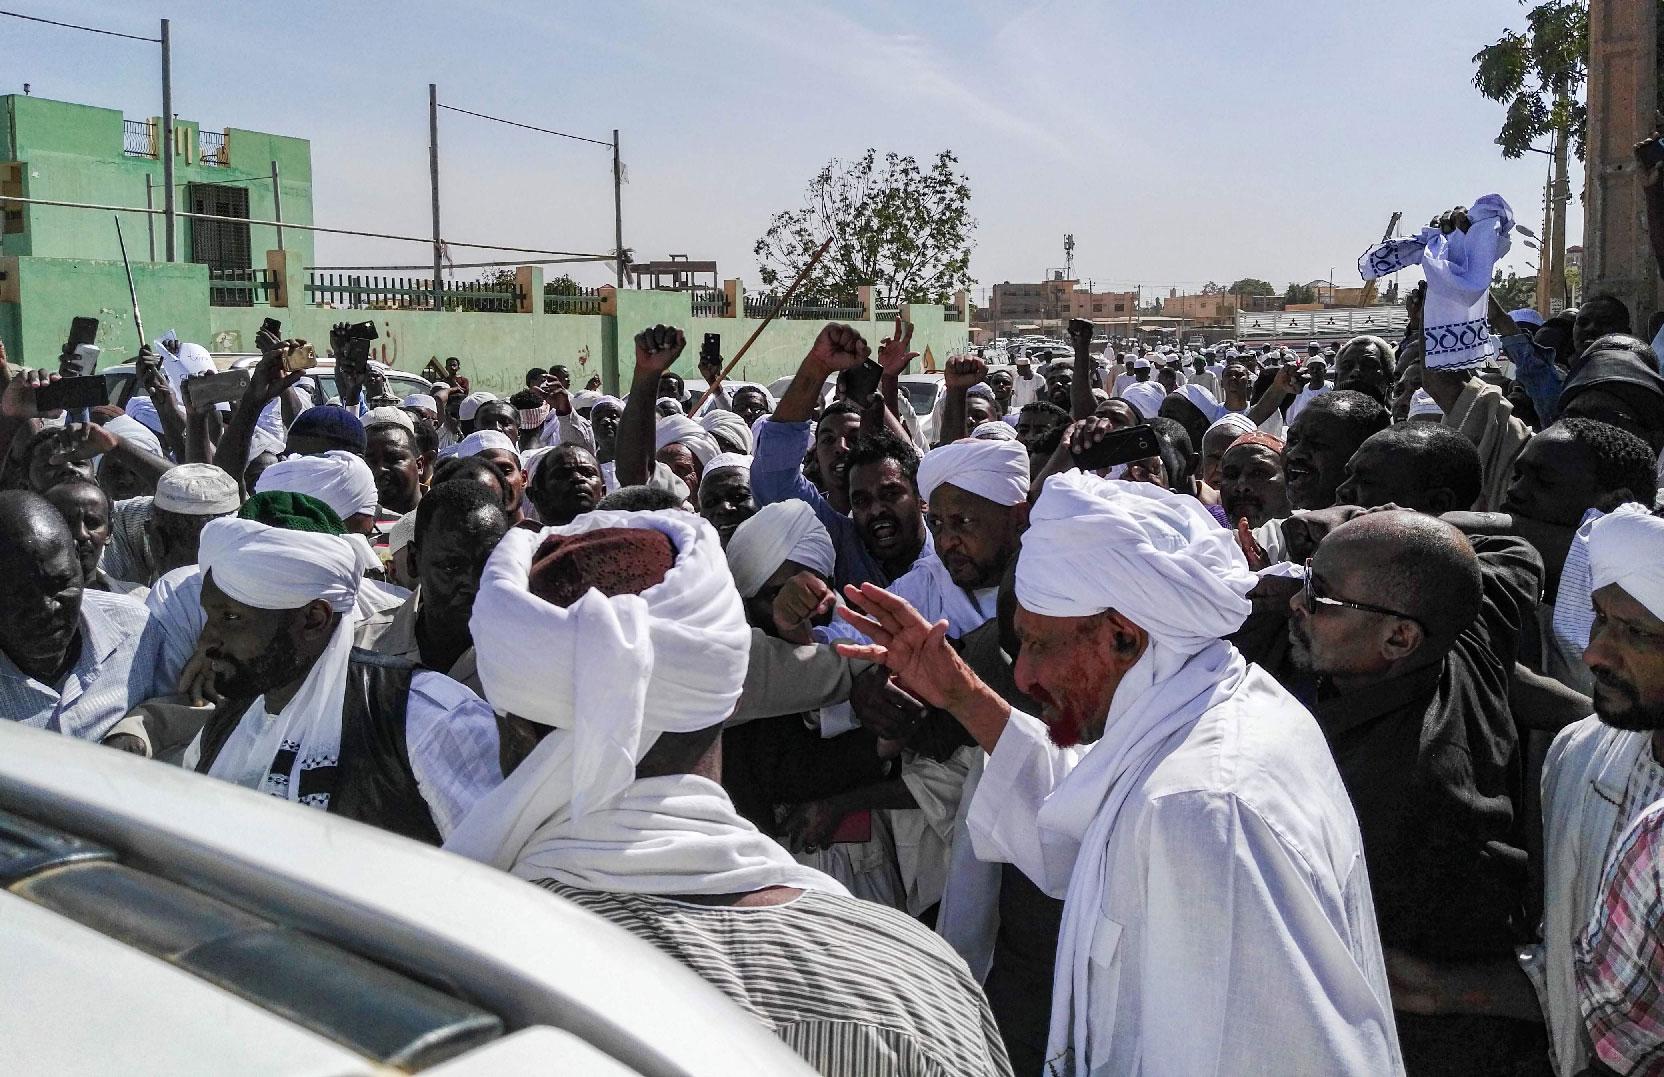 Sadiq al-Mahdi (2nd-R), Sudan's ex-prime minister and leader of the opposition Umma Party, is surrounded by supporters as he exits a mosque during a demonstration in the capital Khartoum's twin city of Omdurman on January 25, 2019.